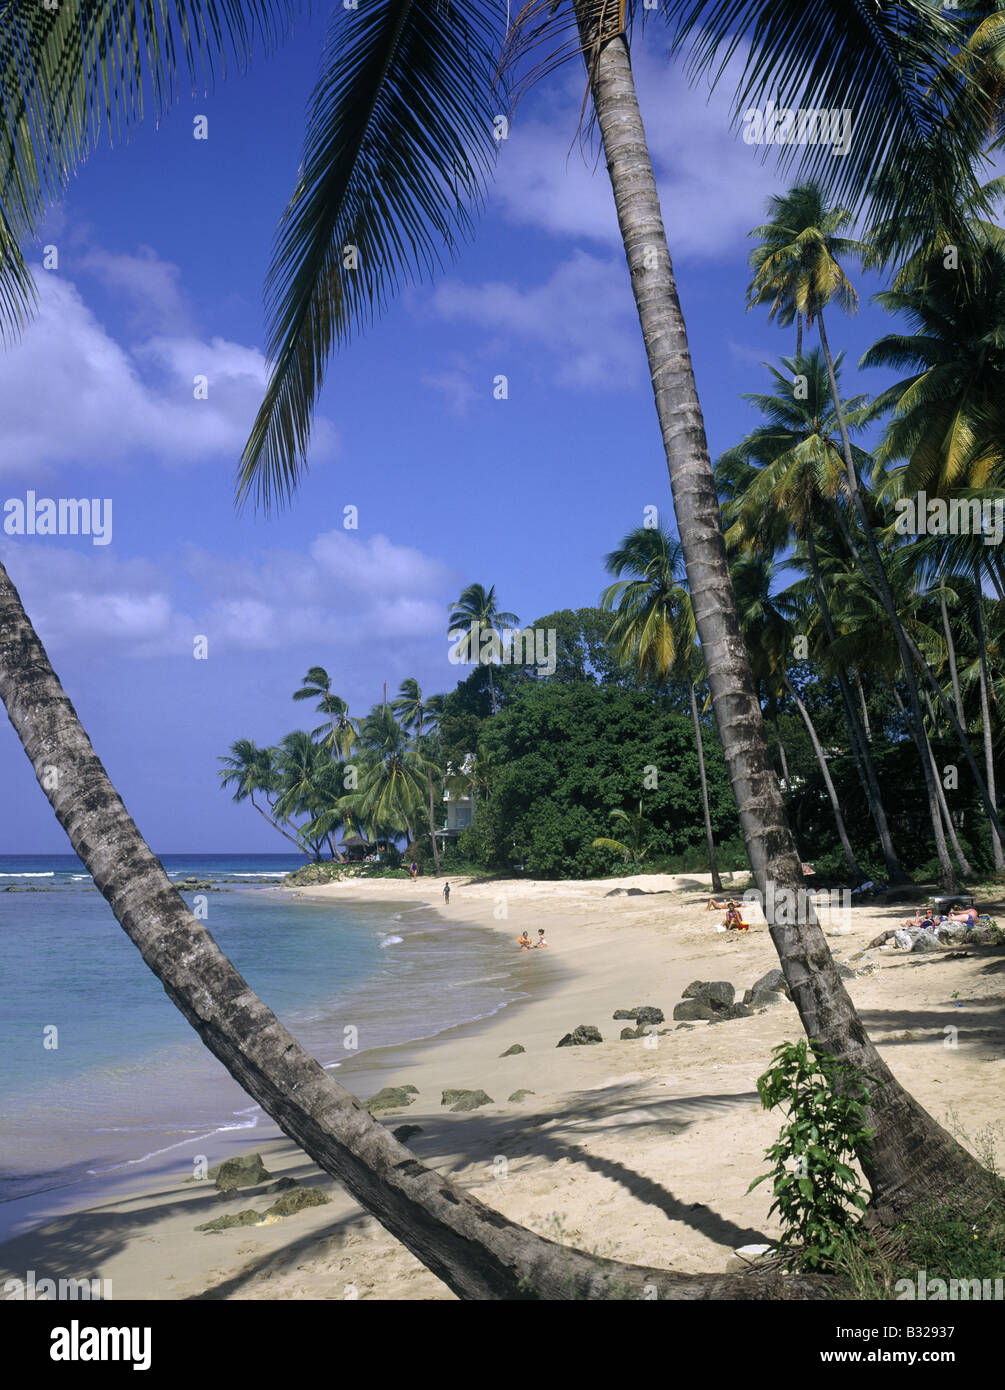 Gibbs beach Palm trees Beach sand Clear calm water Two swimmers people on sand MULLINS BAY WEST COAST BARBADOS Stock Photo